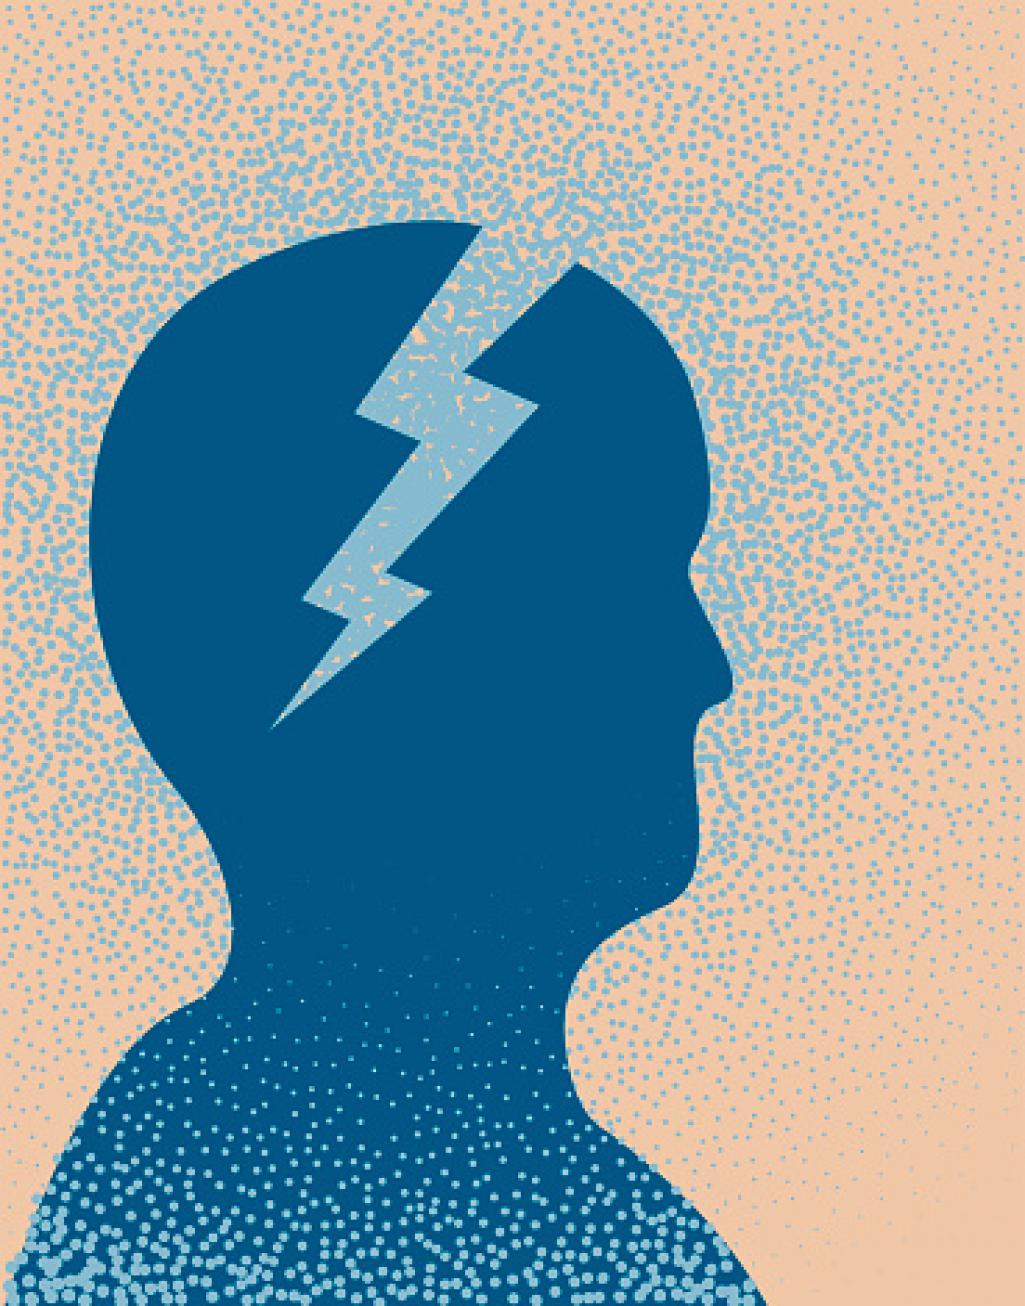 Illustration of a blue head split with lightning against an orange background. Image by Getty Images / porteador.